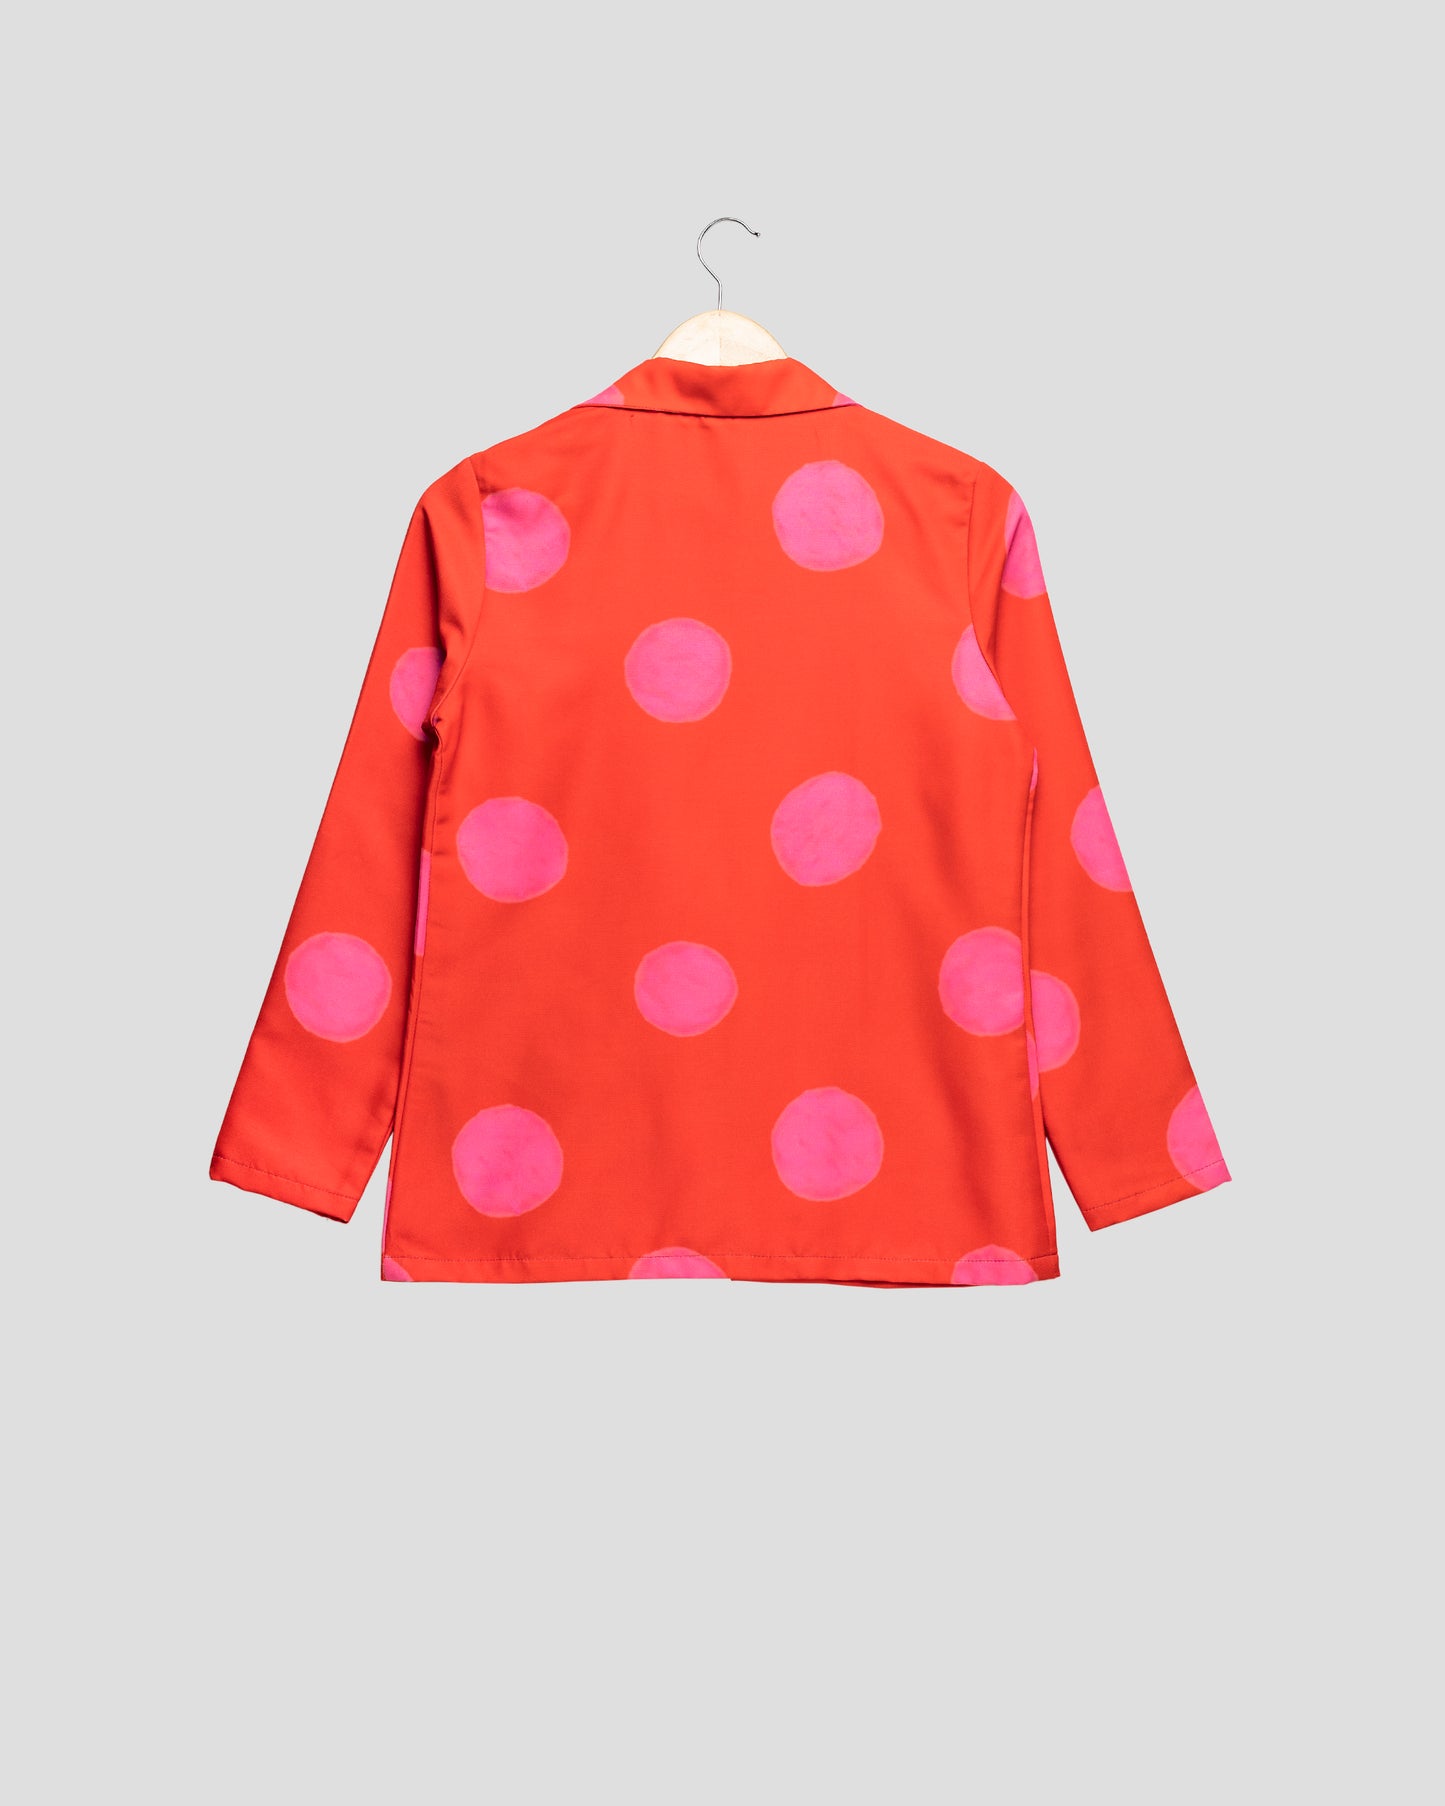 Fabcurate Fashion's High-On-Trend Polka Dots Jacket